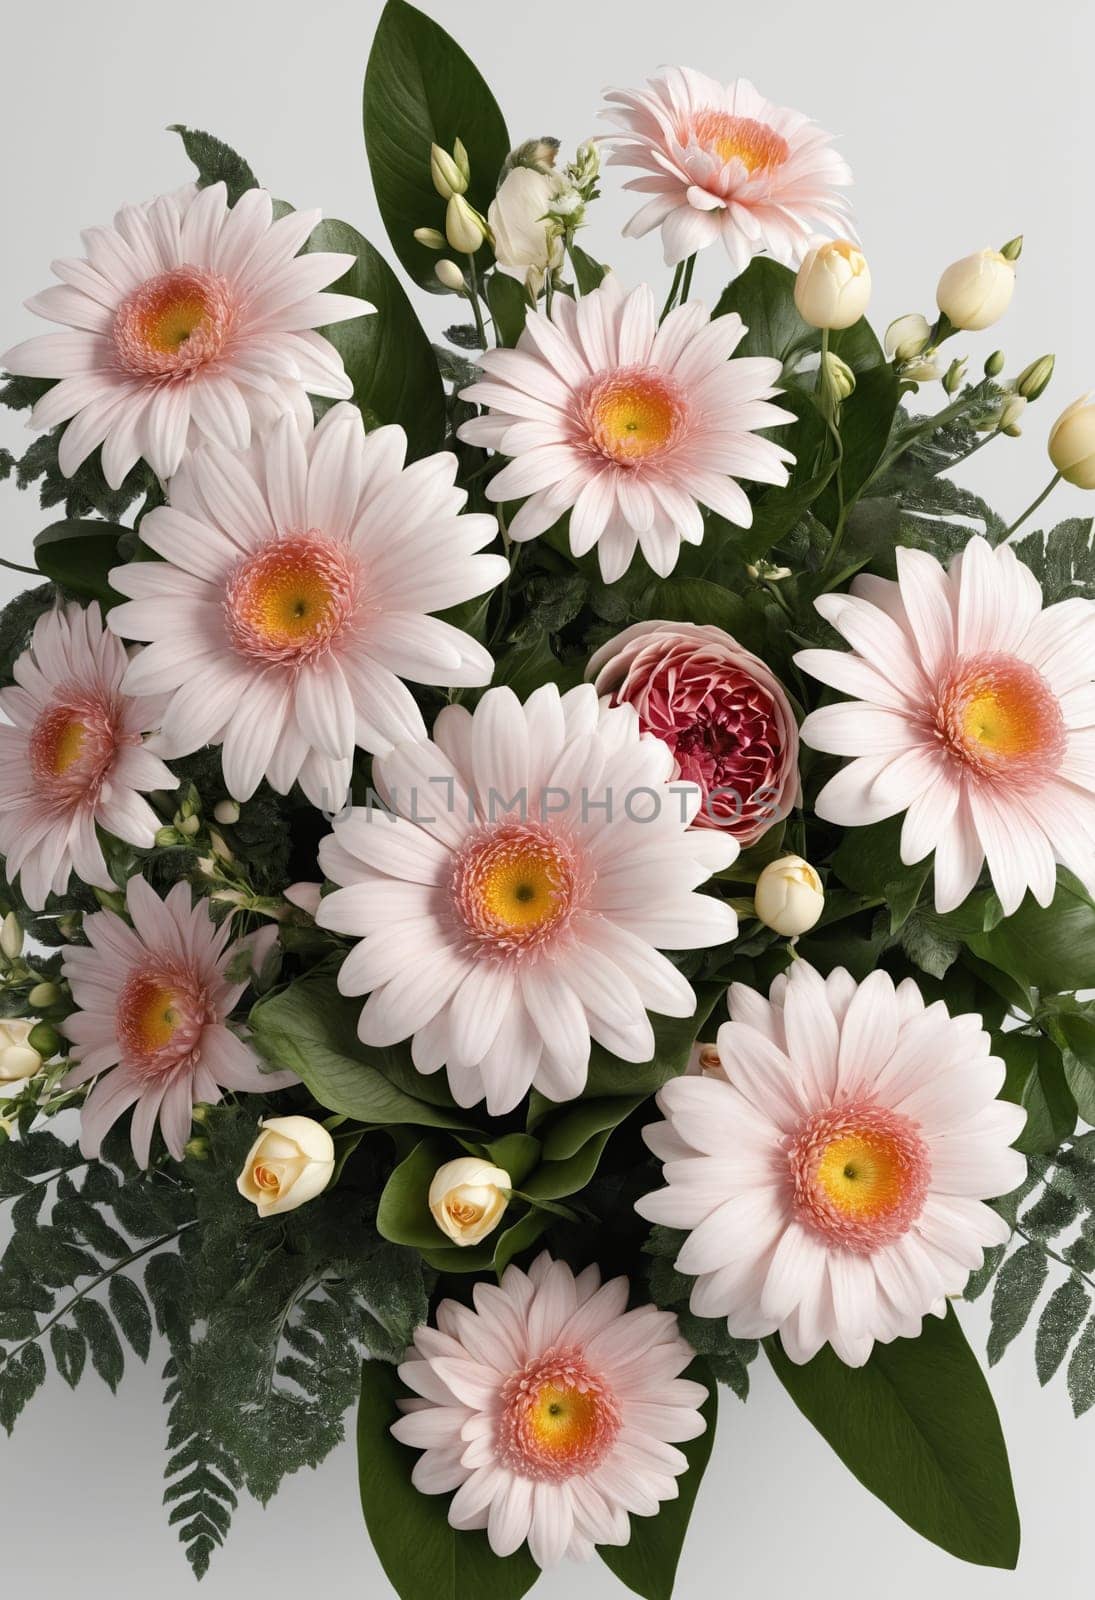 Bouquet of roses, daisies and gerberas by Andre1ns